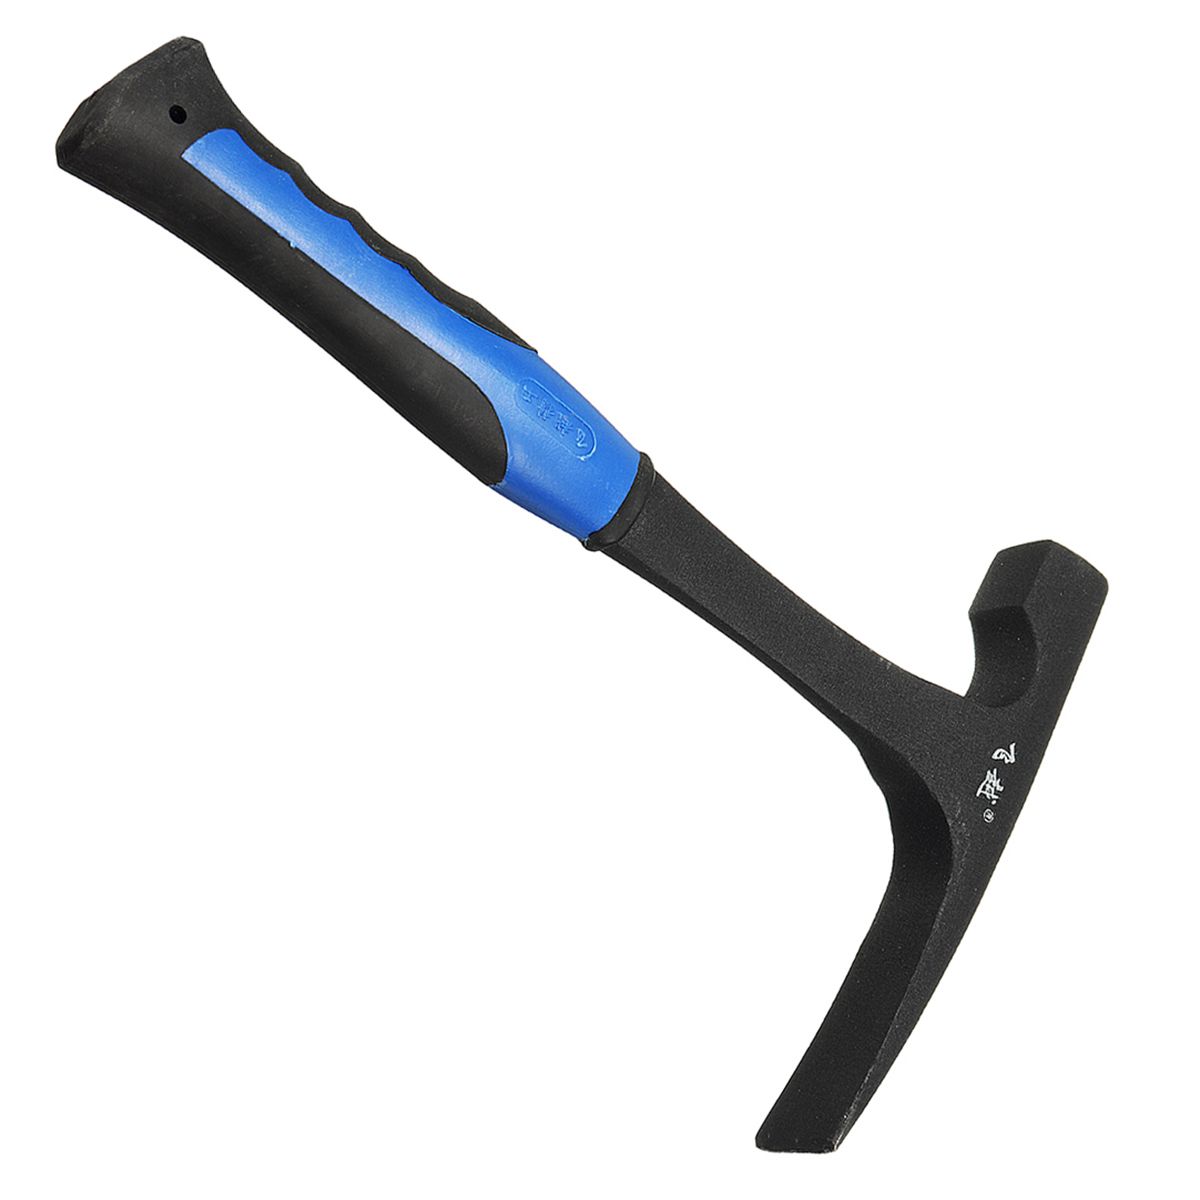 Flat-Pointed-Hammers-Shock-Reduction-Grip-Geology-Prospecting-Mine-Exploration-Tool-1360507